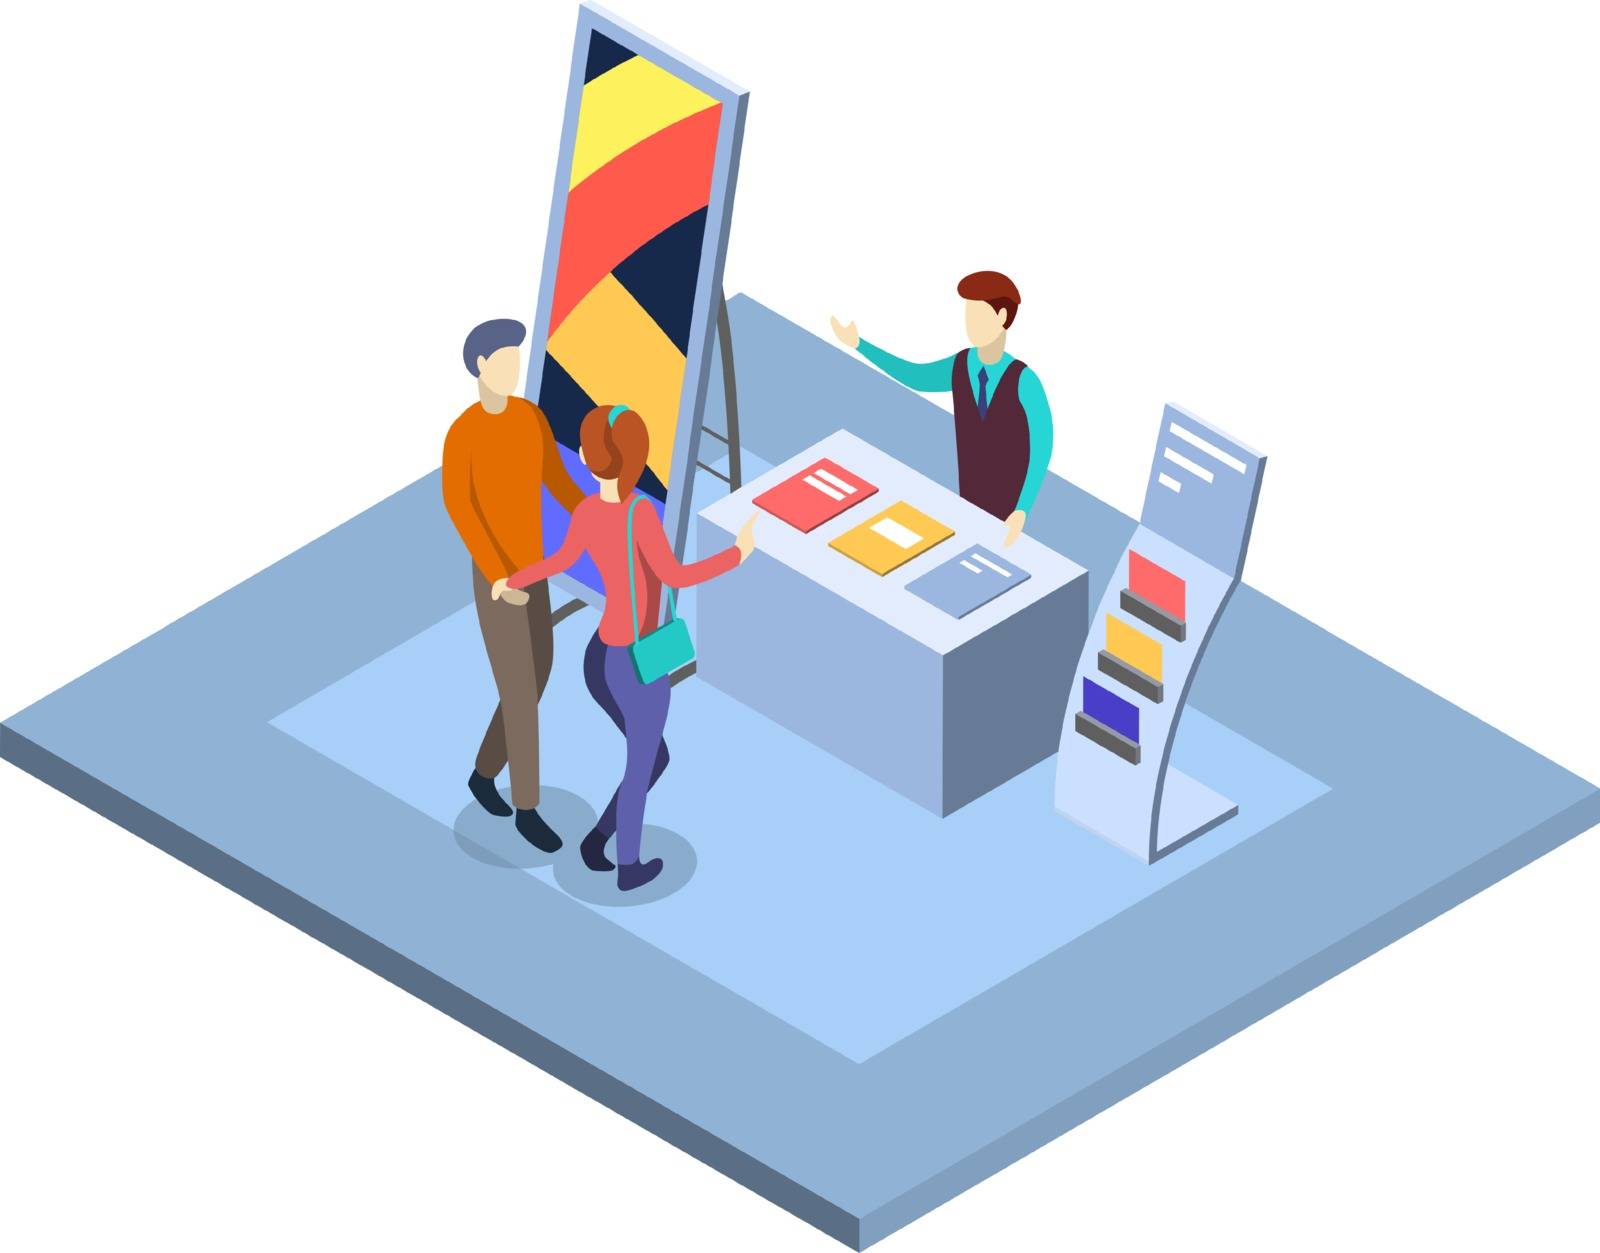 Trade show isometric vector illustration. Visitors at promotional expo stand with salesman, manager characters. Trade exhibition isolated 3d interior. Commercial tradeshow presentation